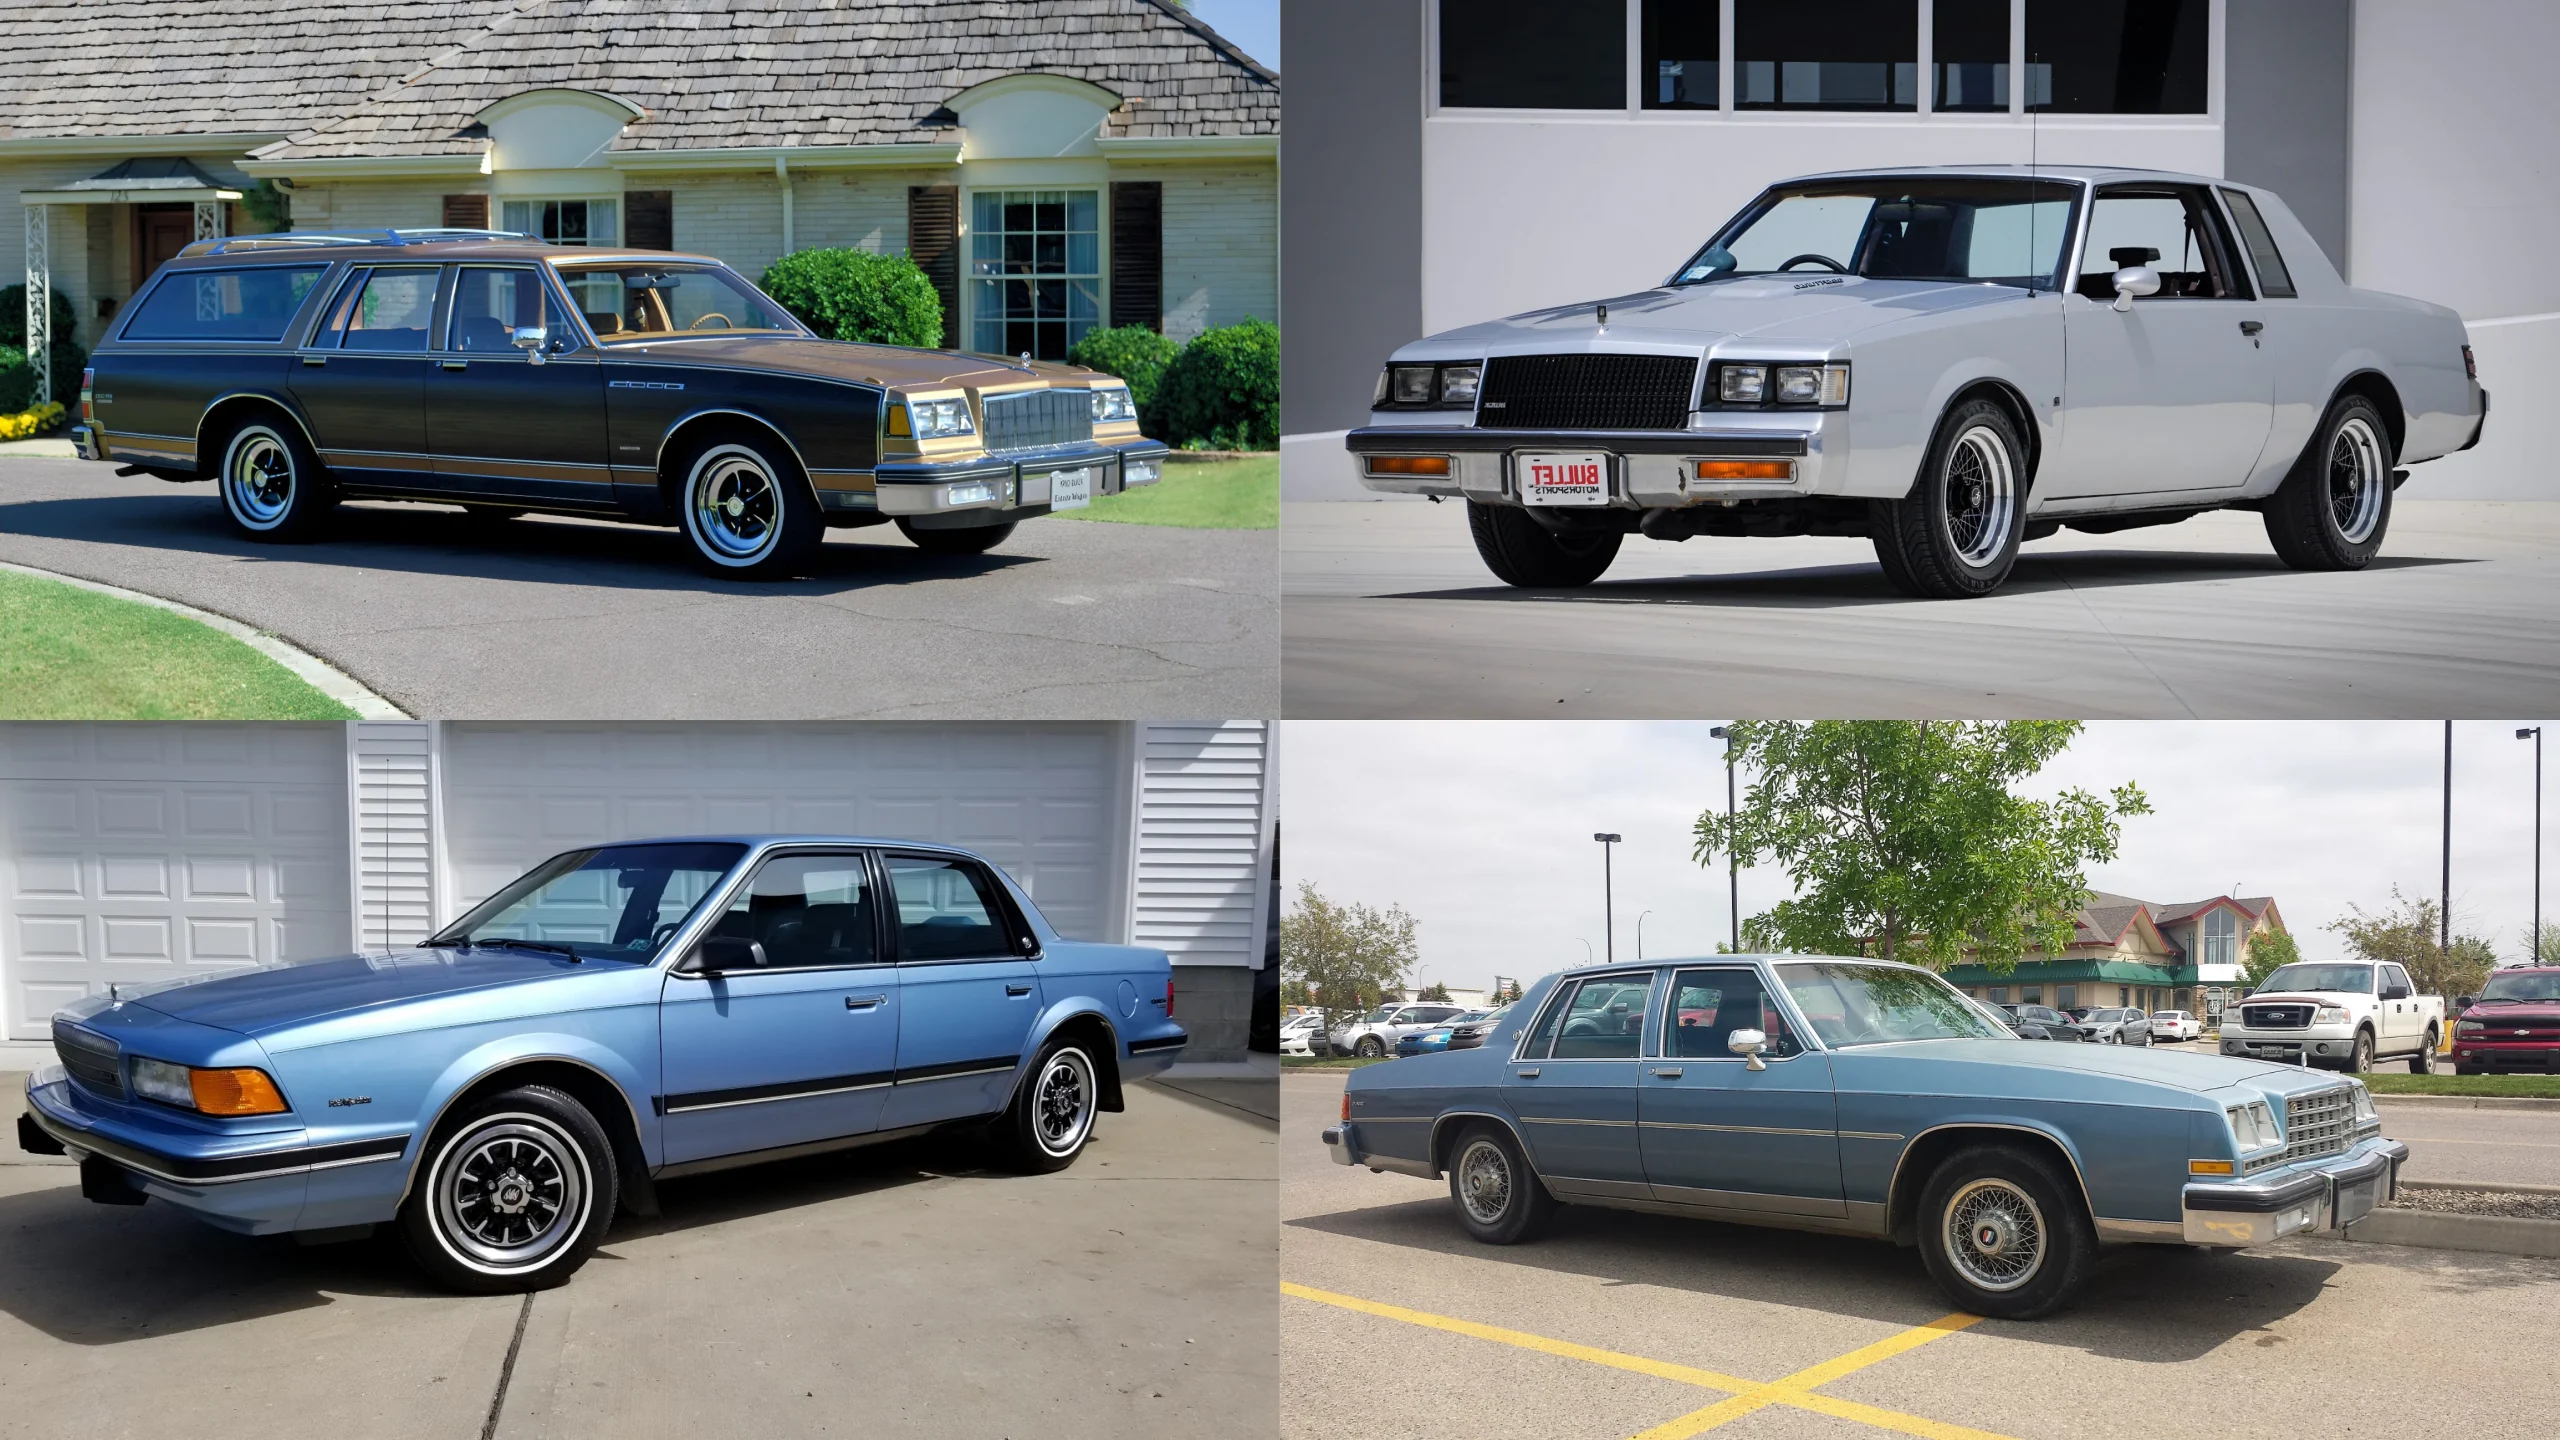 The Best Buick Cars From The 80s